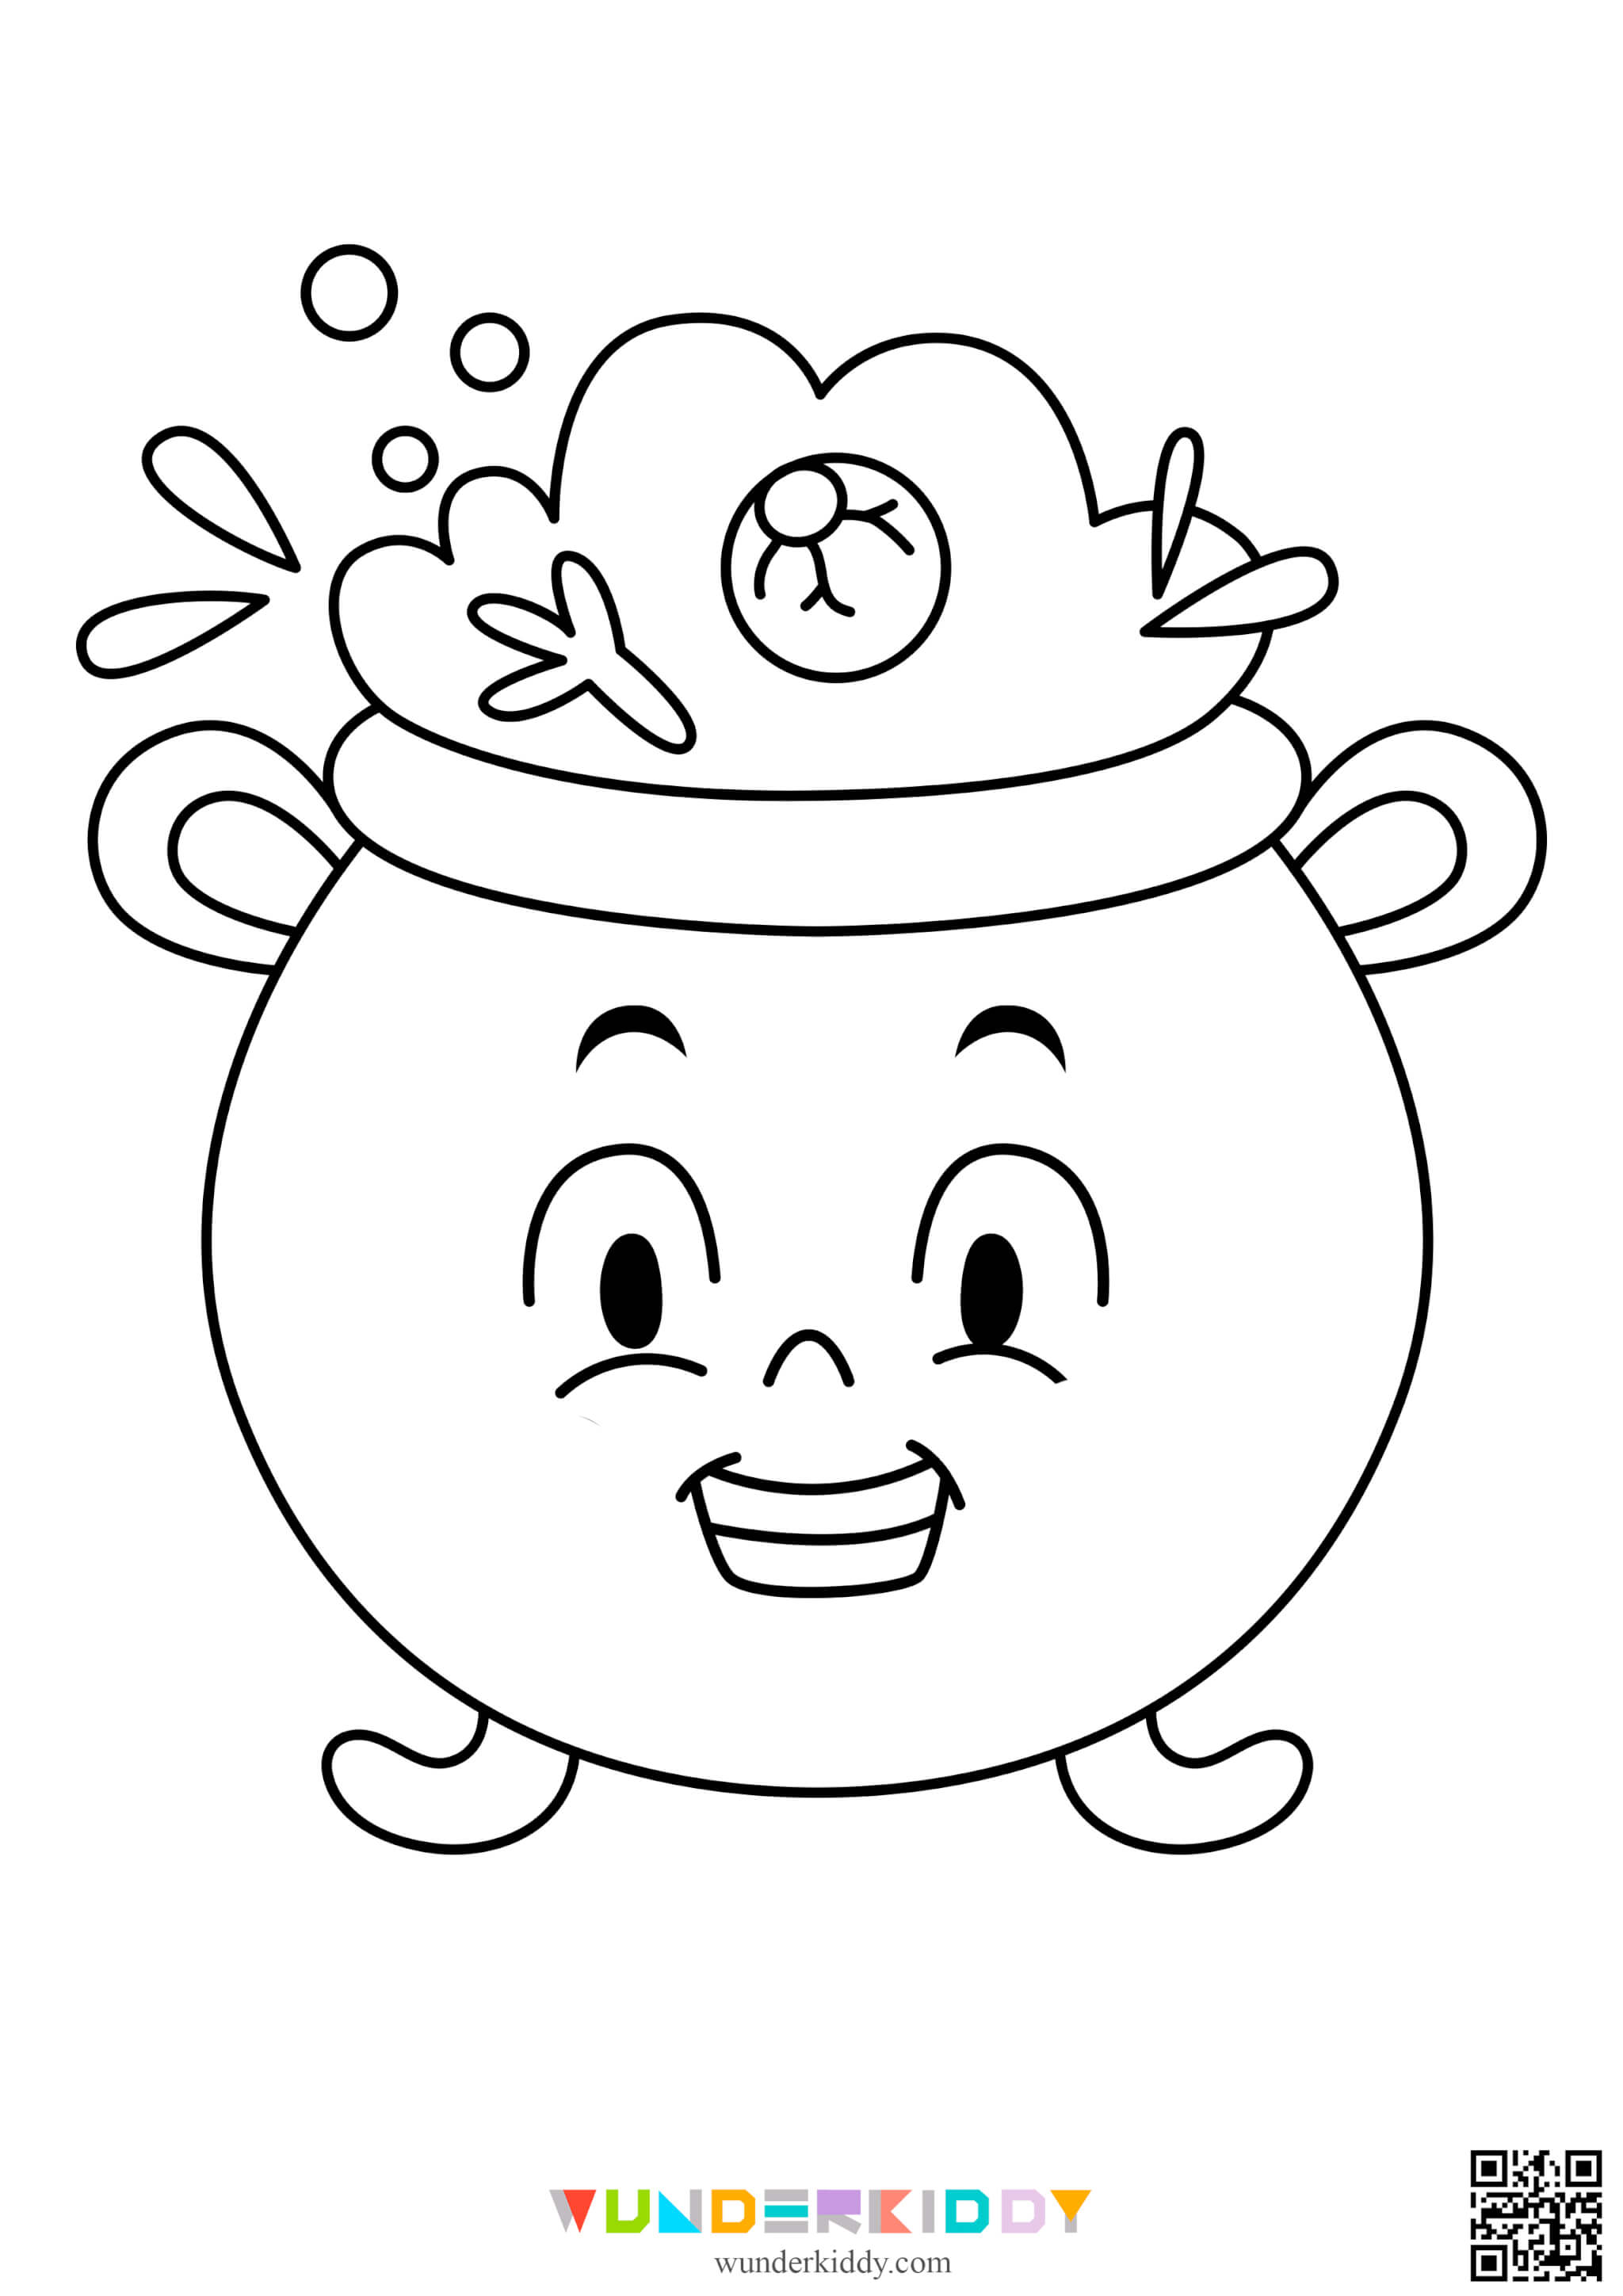 Halloween Coloring Pages - Image 10